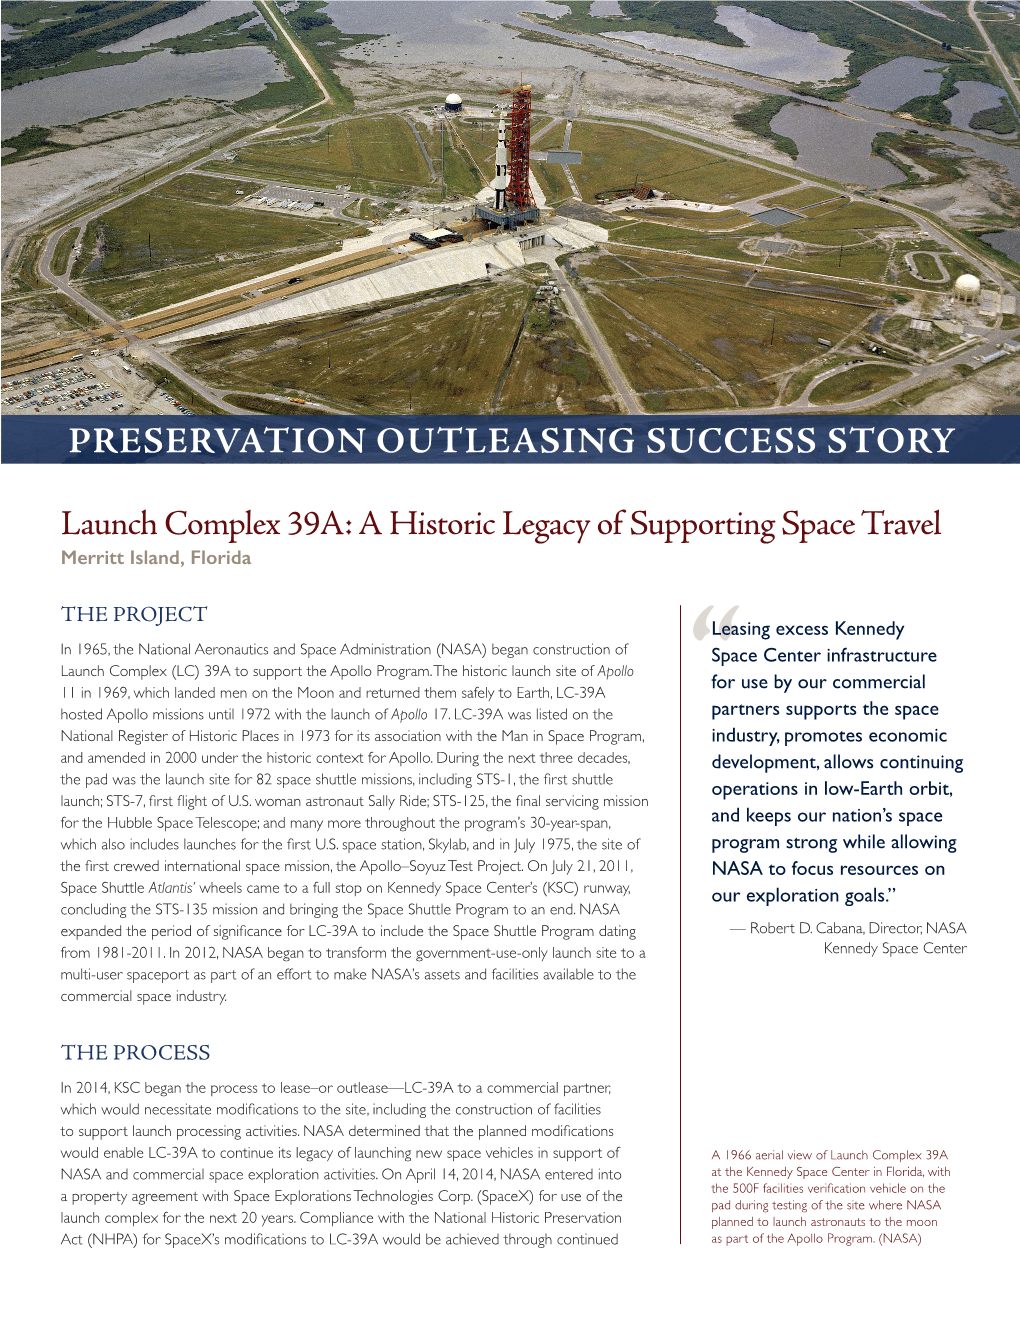 Launch Complex 39A: a Historic Legacy of Supporting Space Travel Merritt Island, Florida